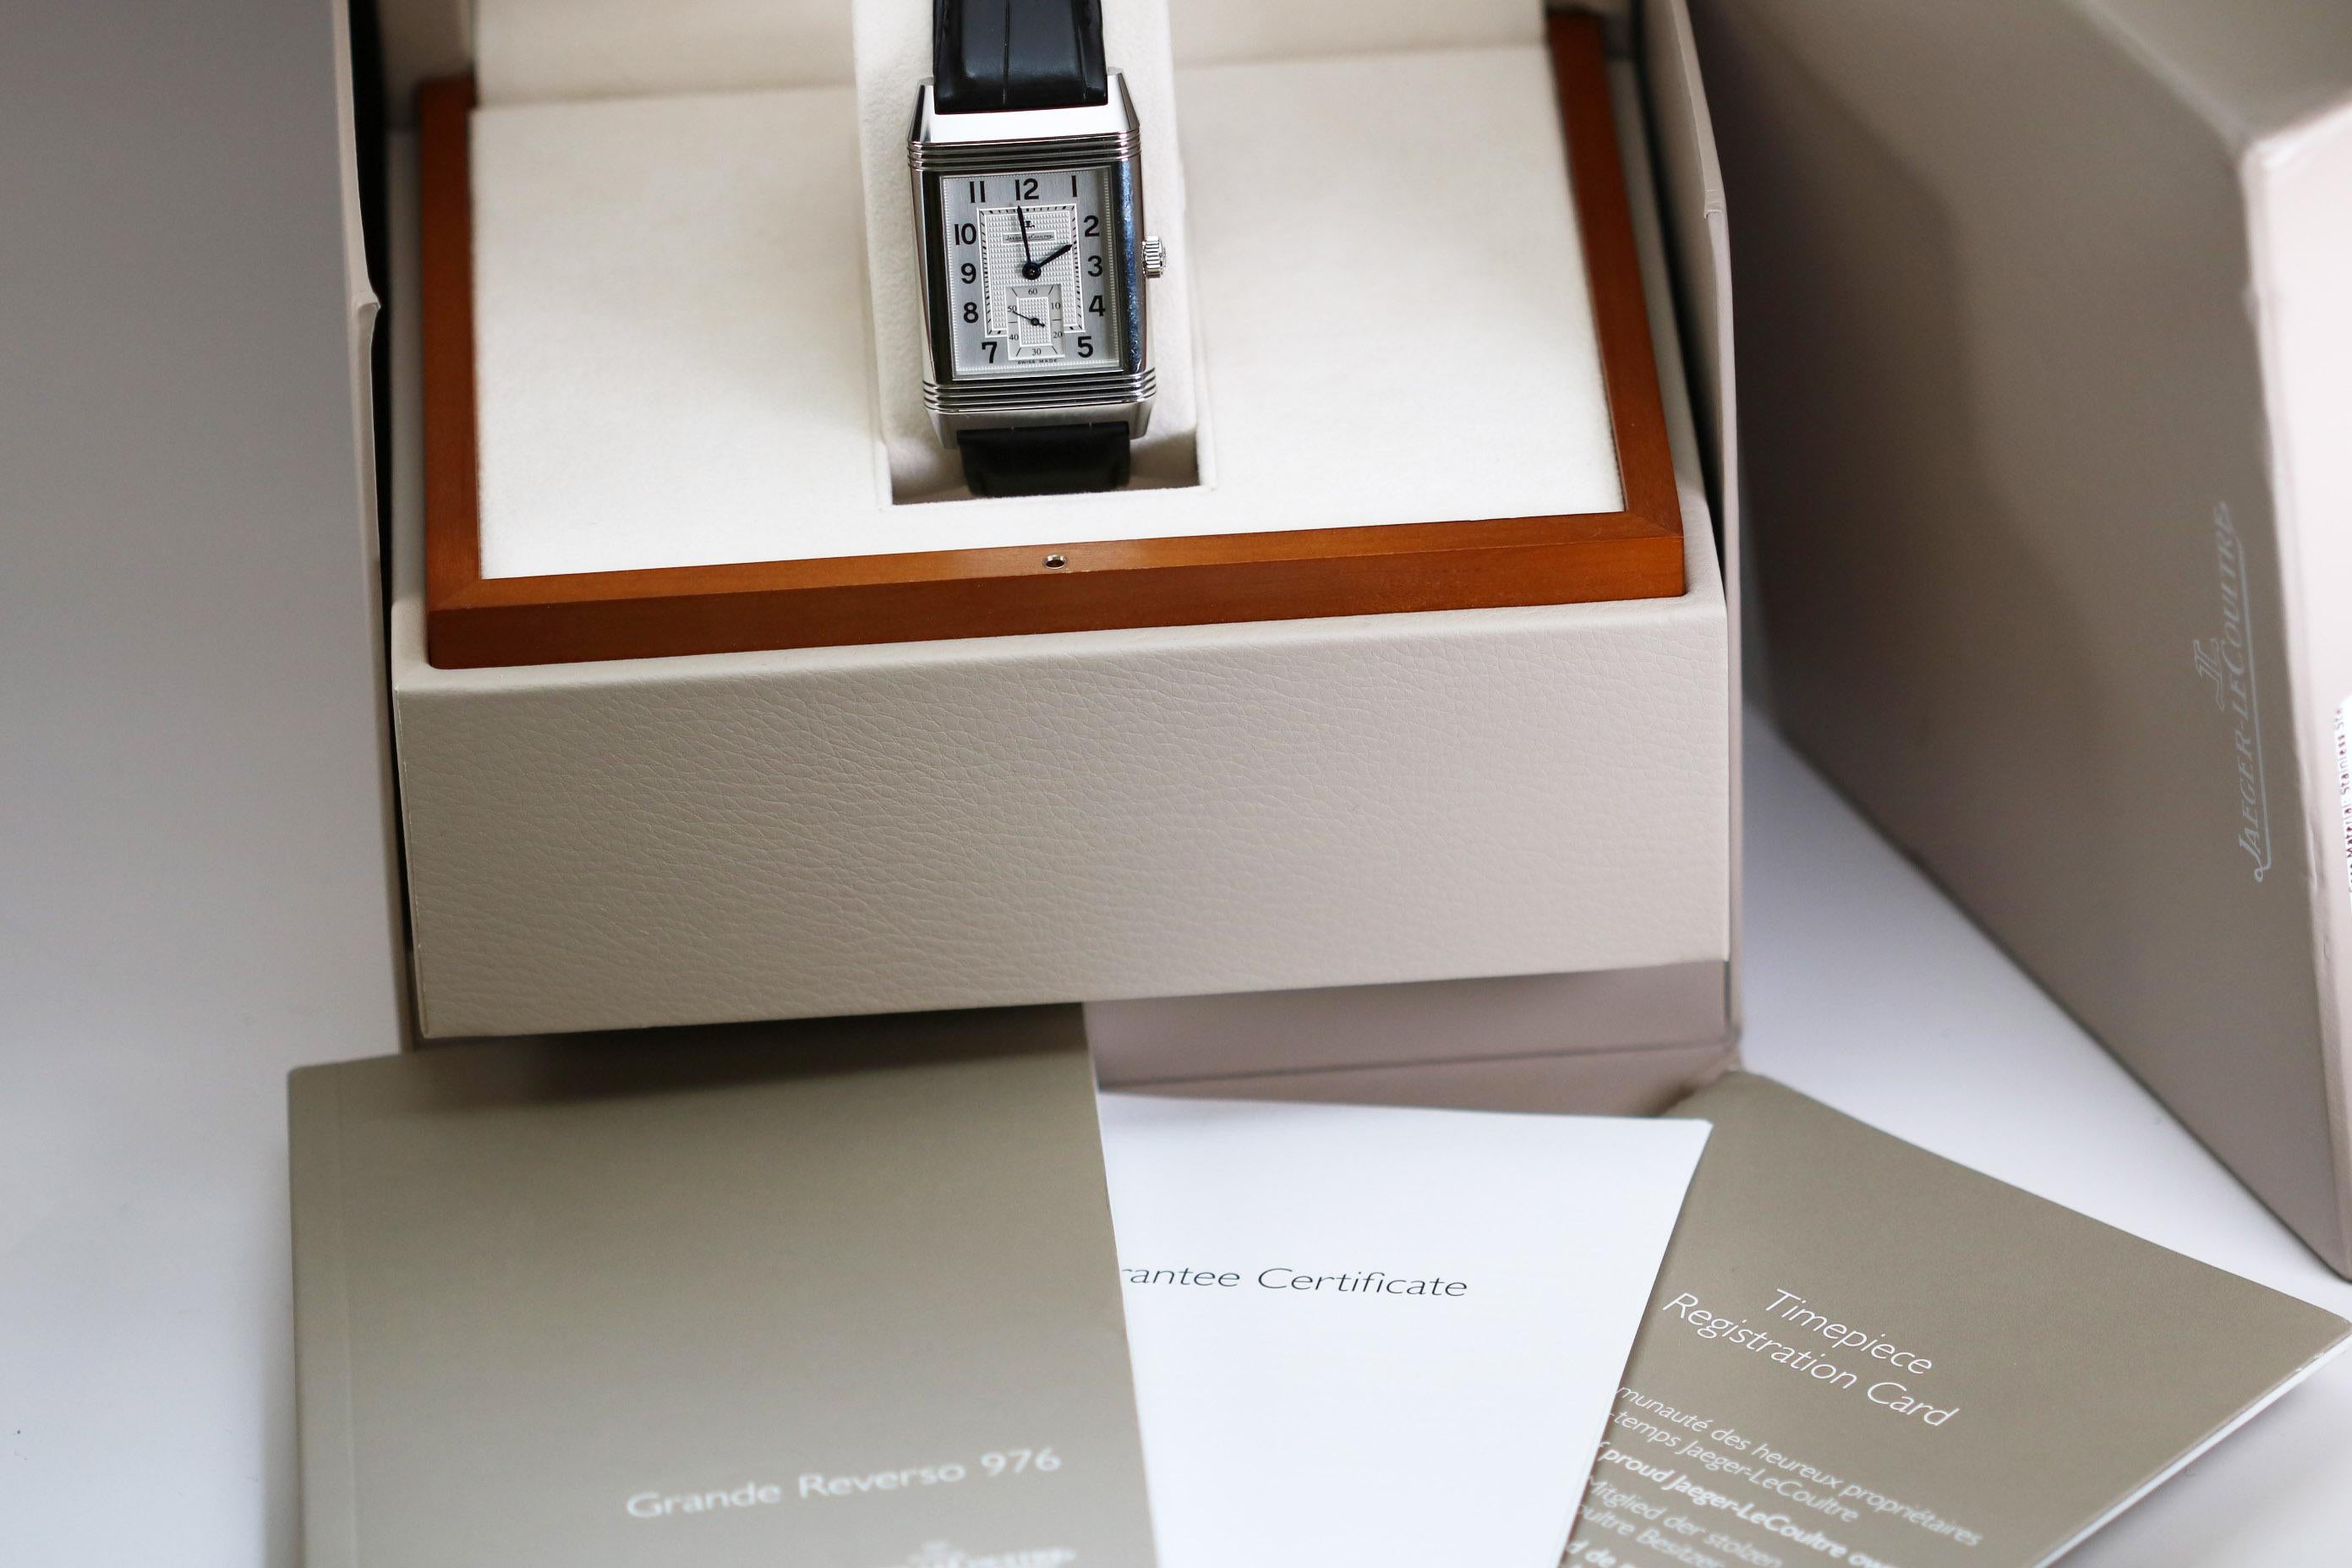 Jaeger-LeCoultre Stainless Steel Grand Reverso 976 with Box & Papers c. 2010 6